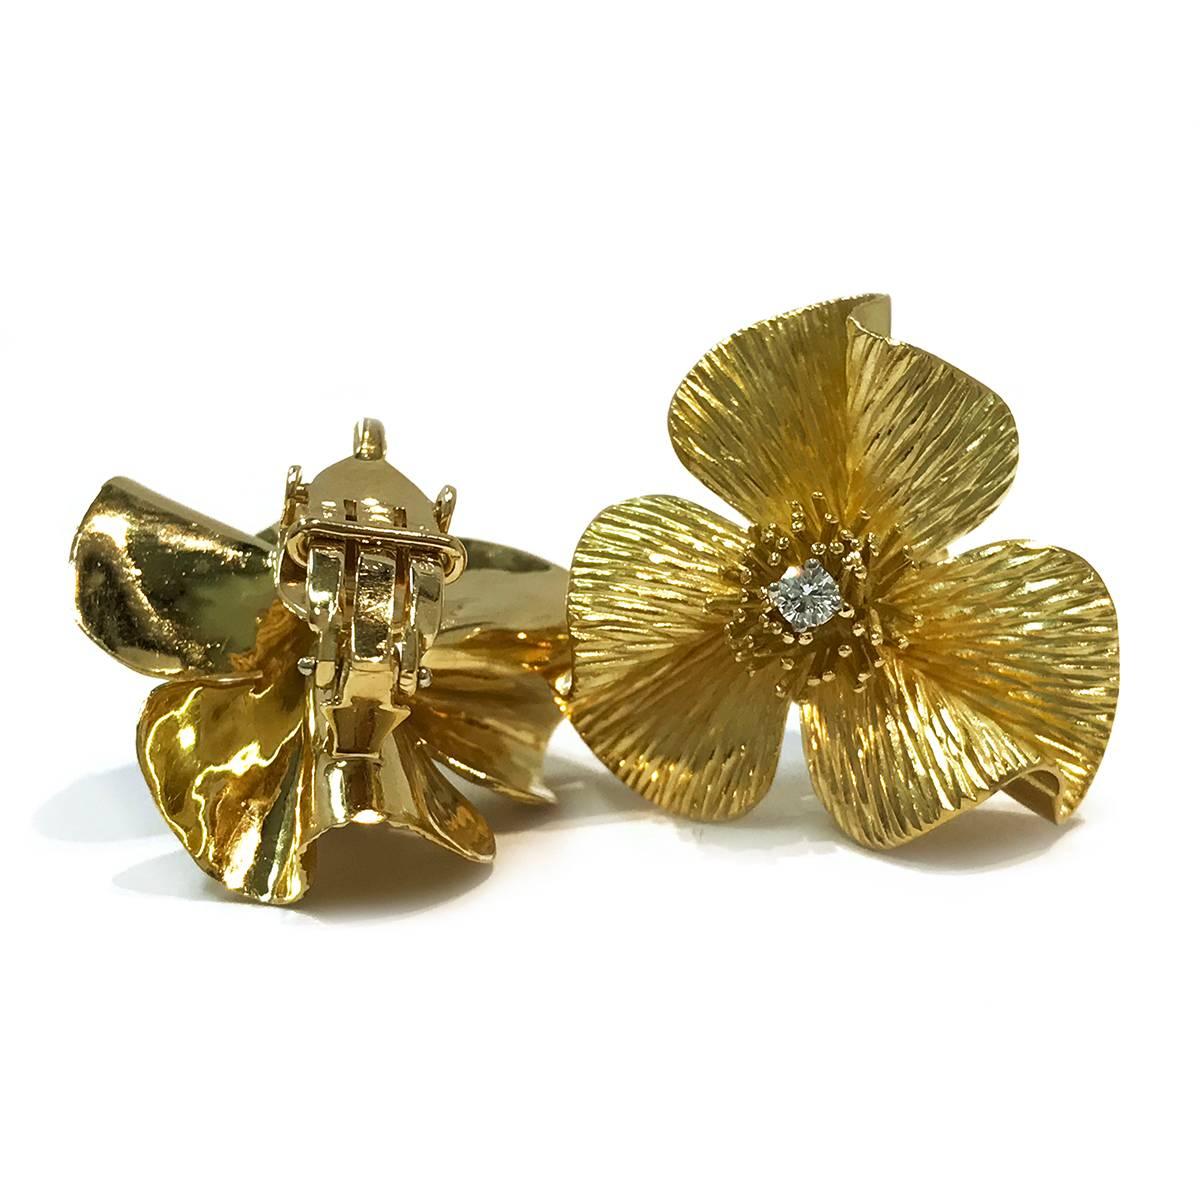 Retro/Vintage 18K Yellow Gold Large Textured Flower Clip-on Earrings with round brilliant-cut center Diamond. The center diamonds have a total carat weight of 0.20ctw. Stamped on the back of the clip is PAT 2423905 and a double “P” logo. The clips